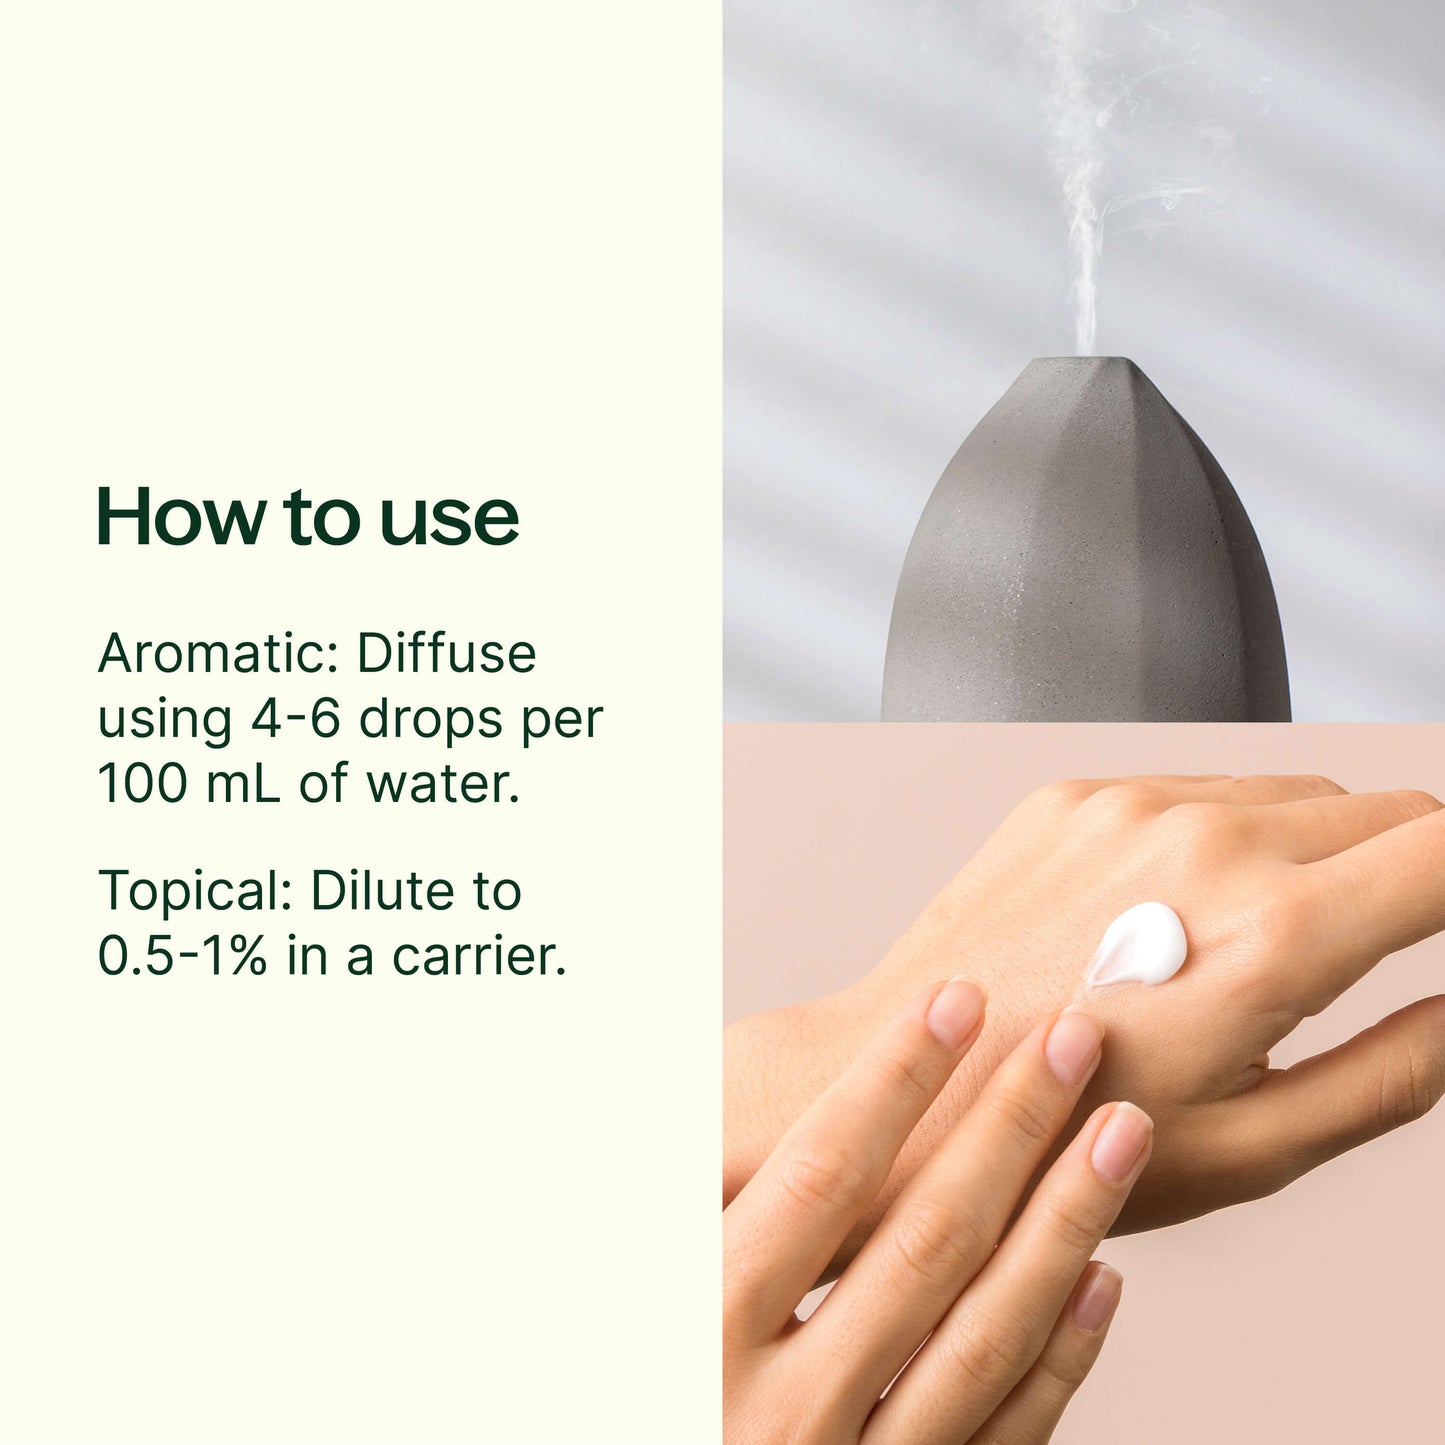 How to use: aromatic - diffuse using 4-6 drops per 100 ml of water. Topical - dilute to 0.5-1% in a carrier. 